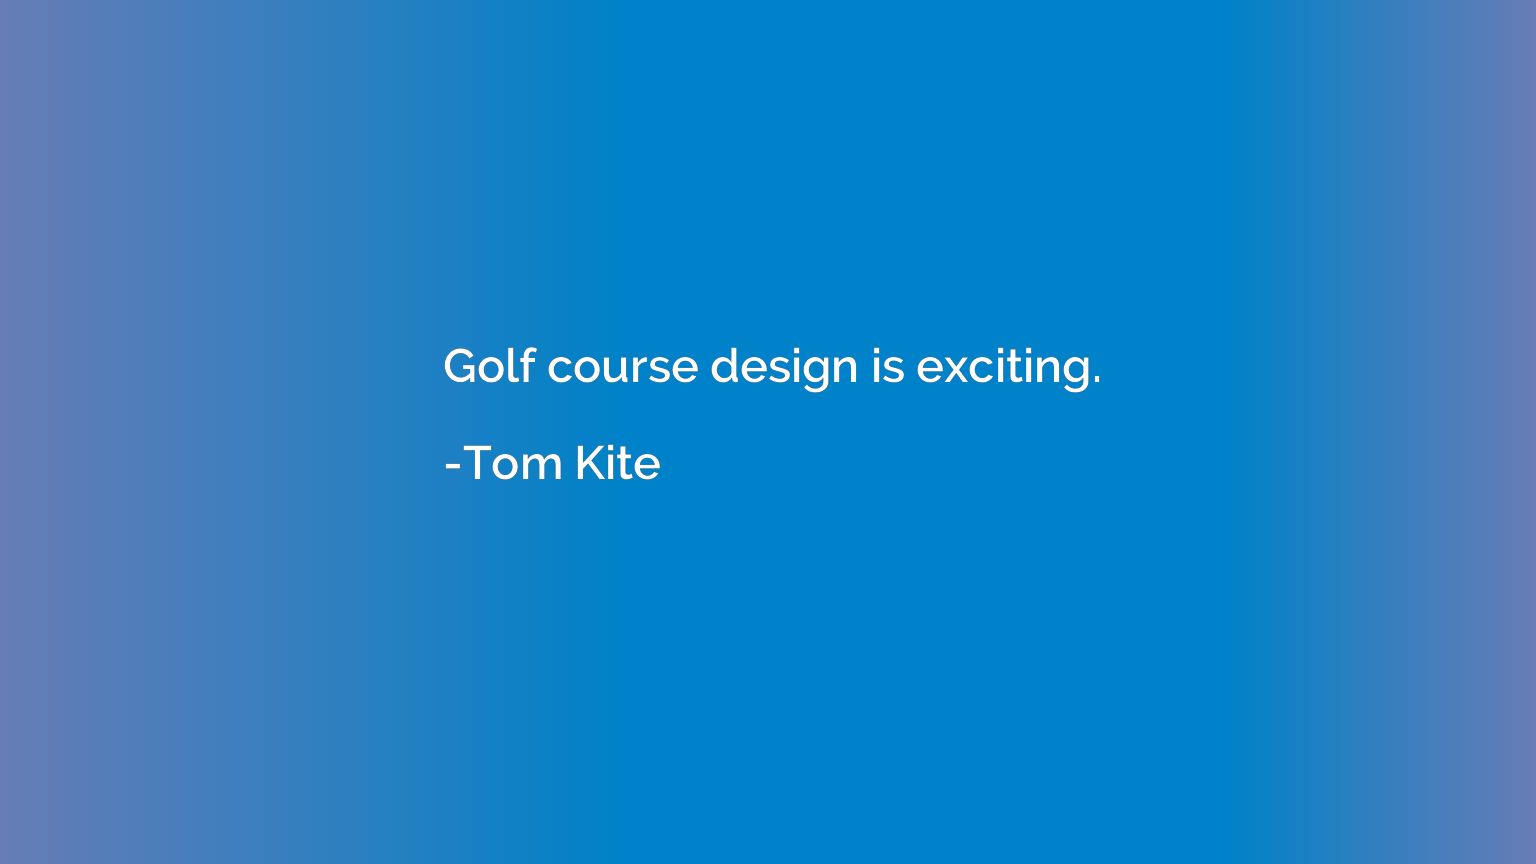 Golf course design is exciting.